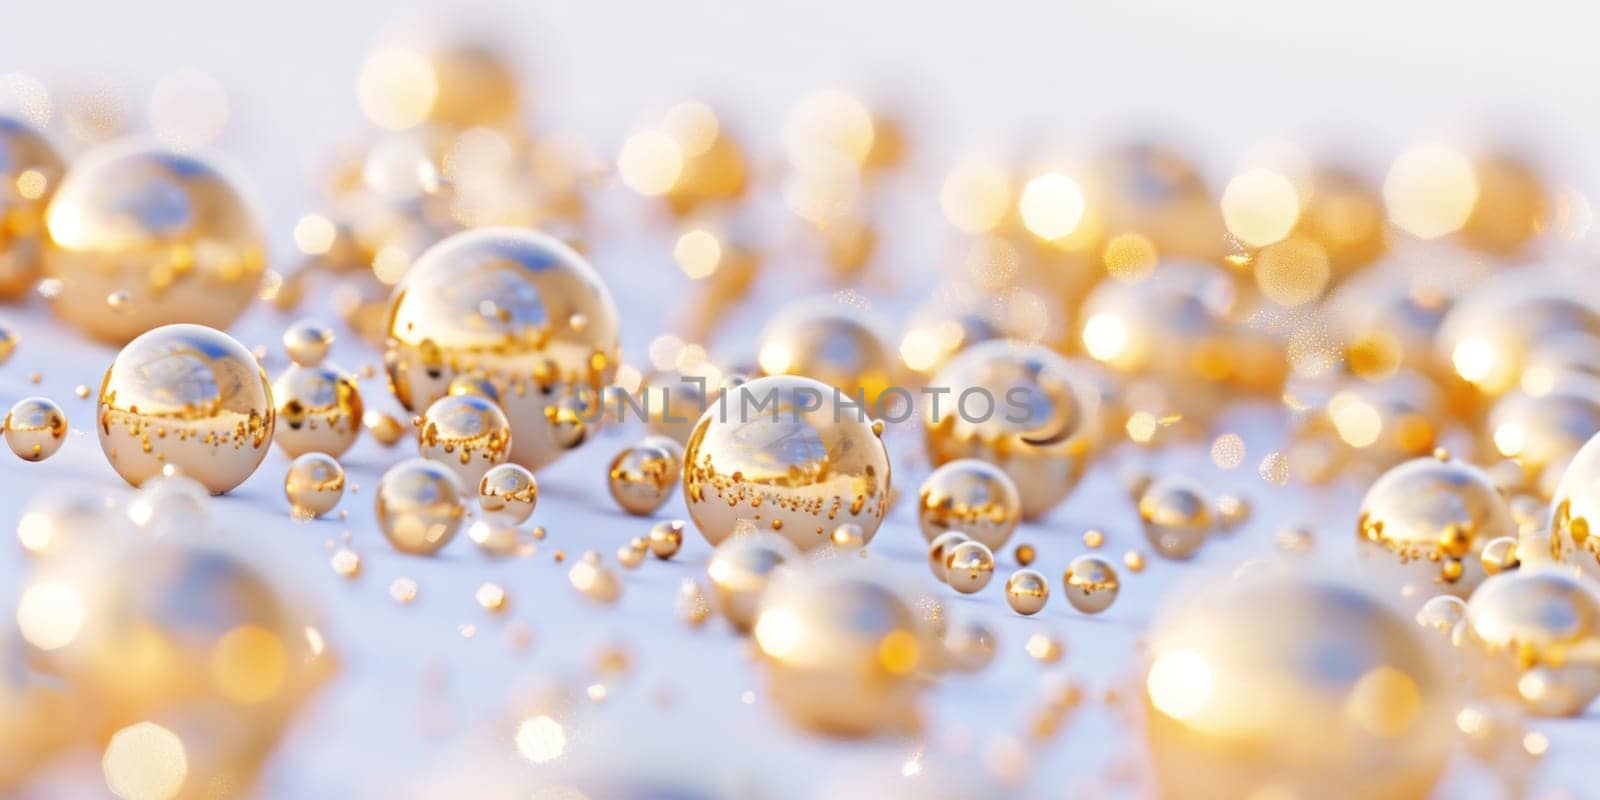 Golden balls scattered on white surface with bright light background luxury, wealth, and elegance in decor